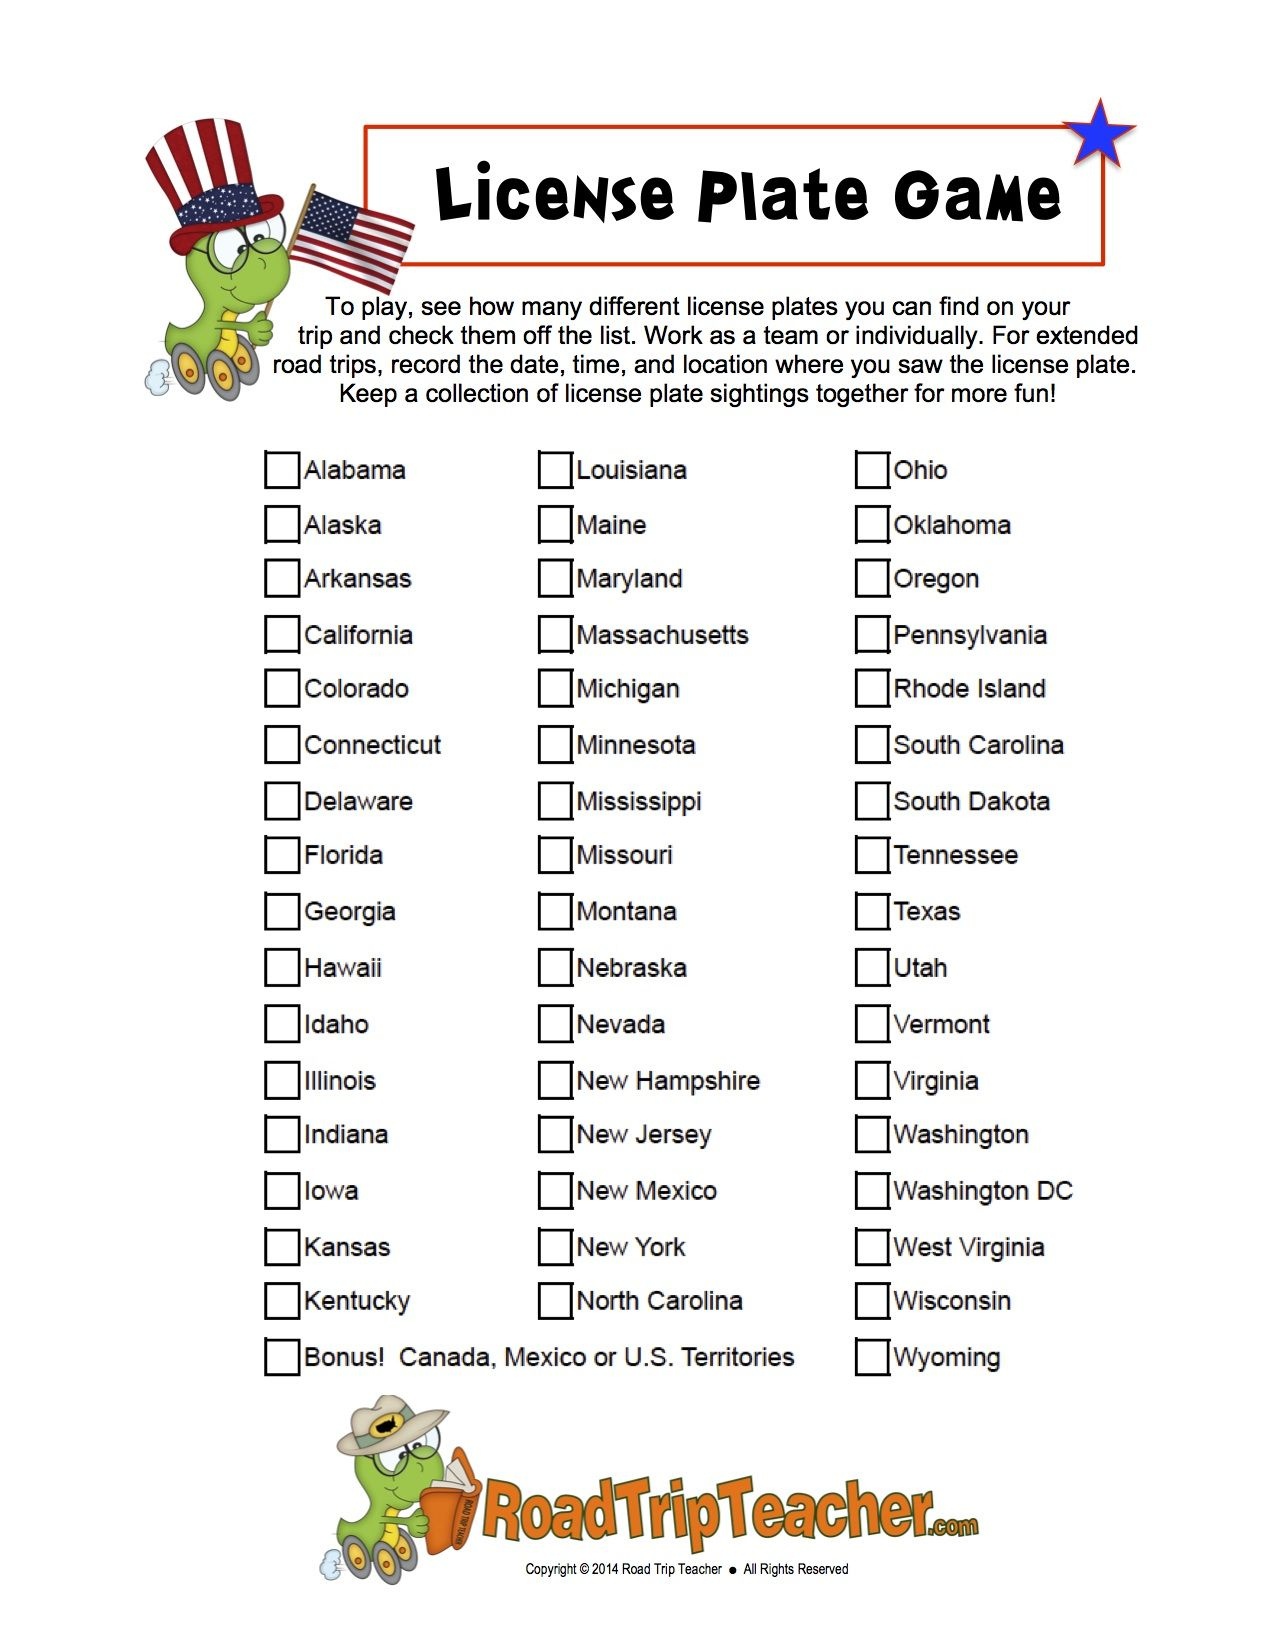 License Plate Game Free Printable In 2019 | Road Trips | Road Trip - Free Printable Car Ride Games